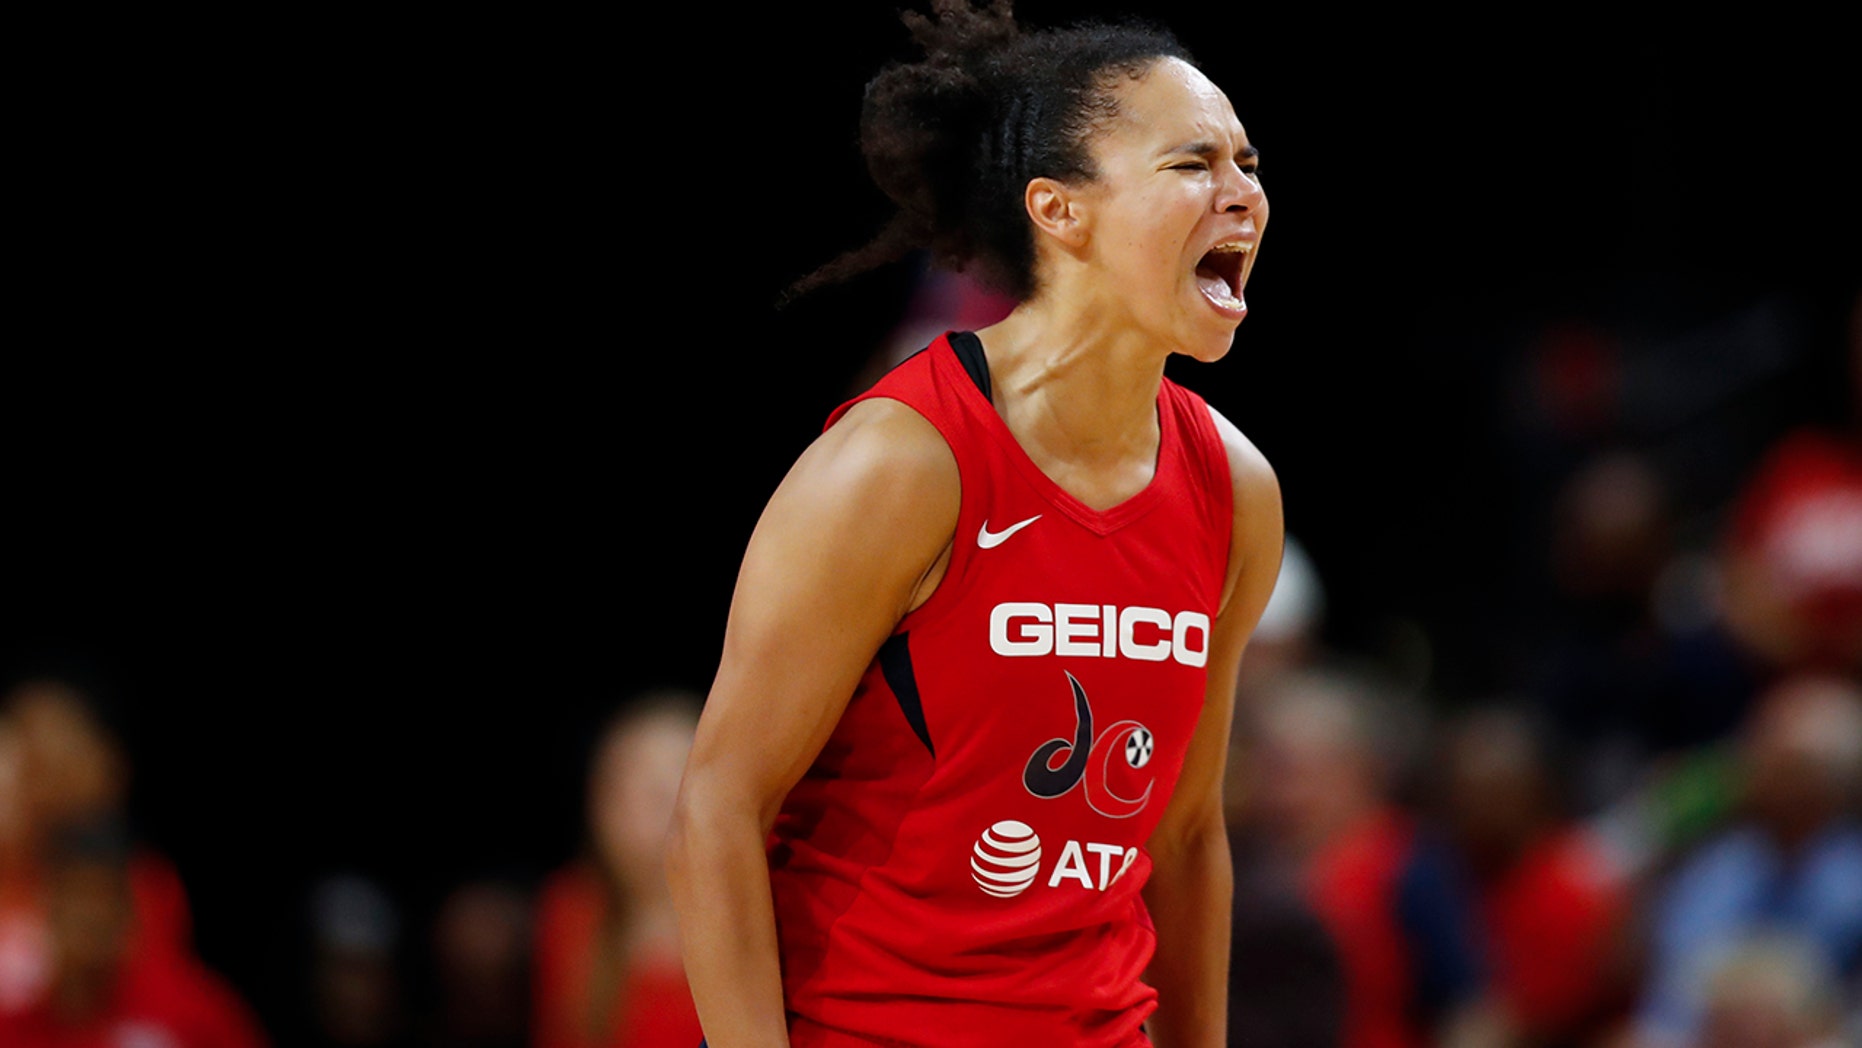 Washington Mystics guard Kristi Toliver reacts during the second half of Game 5 of basketball's WNBA Finals against the Connecticut Sun, Thursday, Oct. 10, 2019, in Washington. (AP Photo/Alex Brandon)